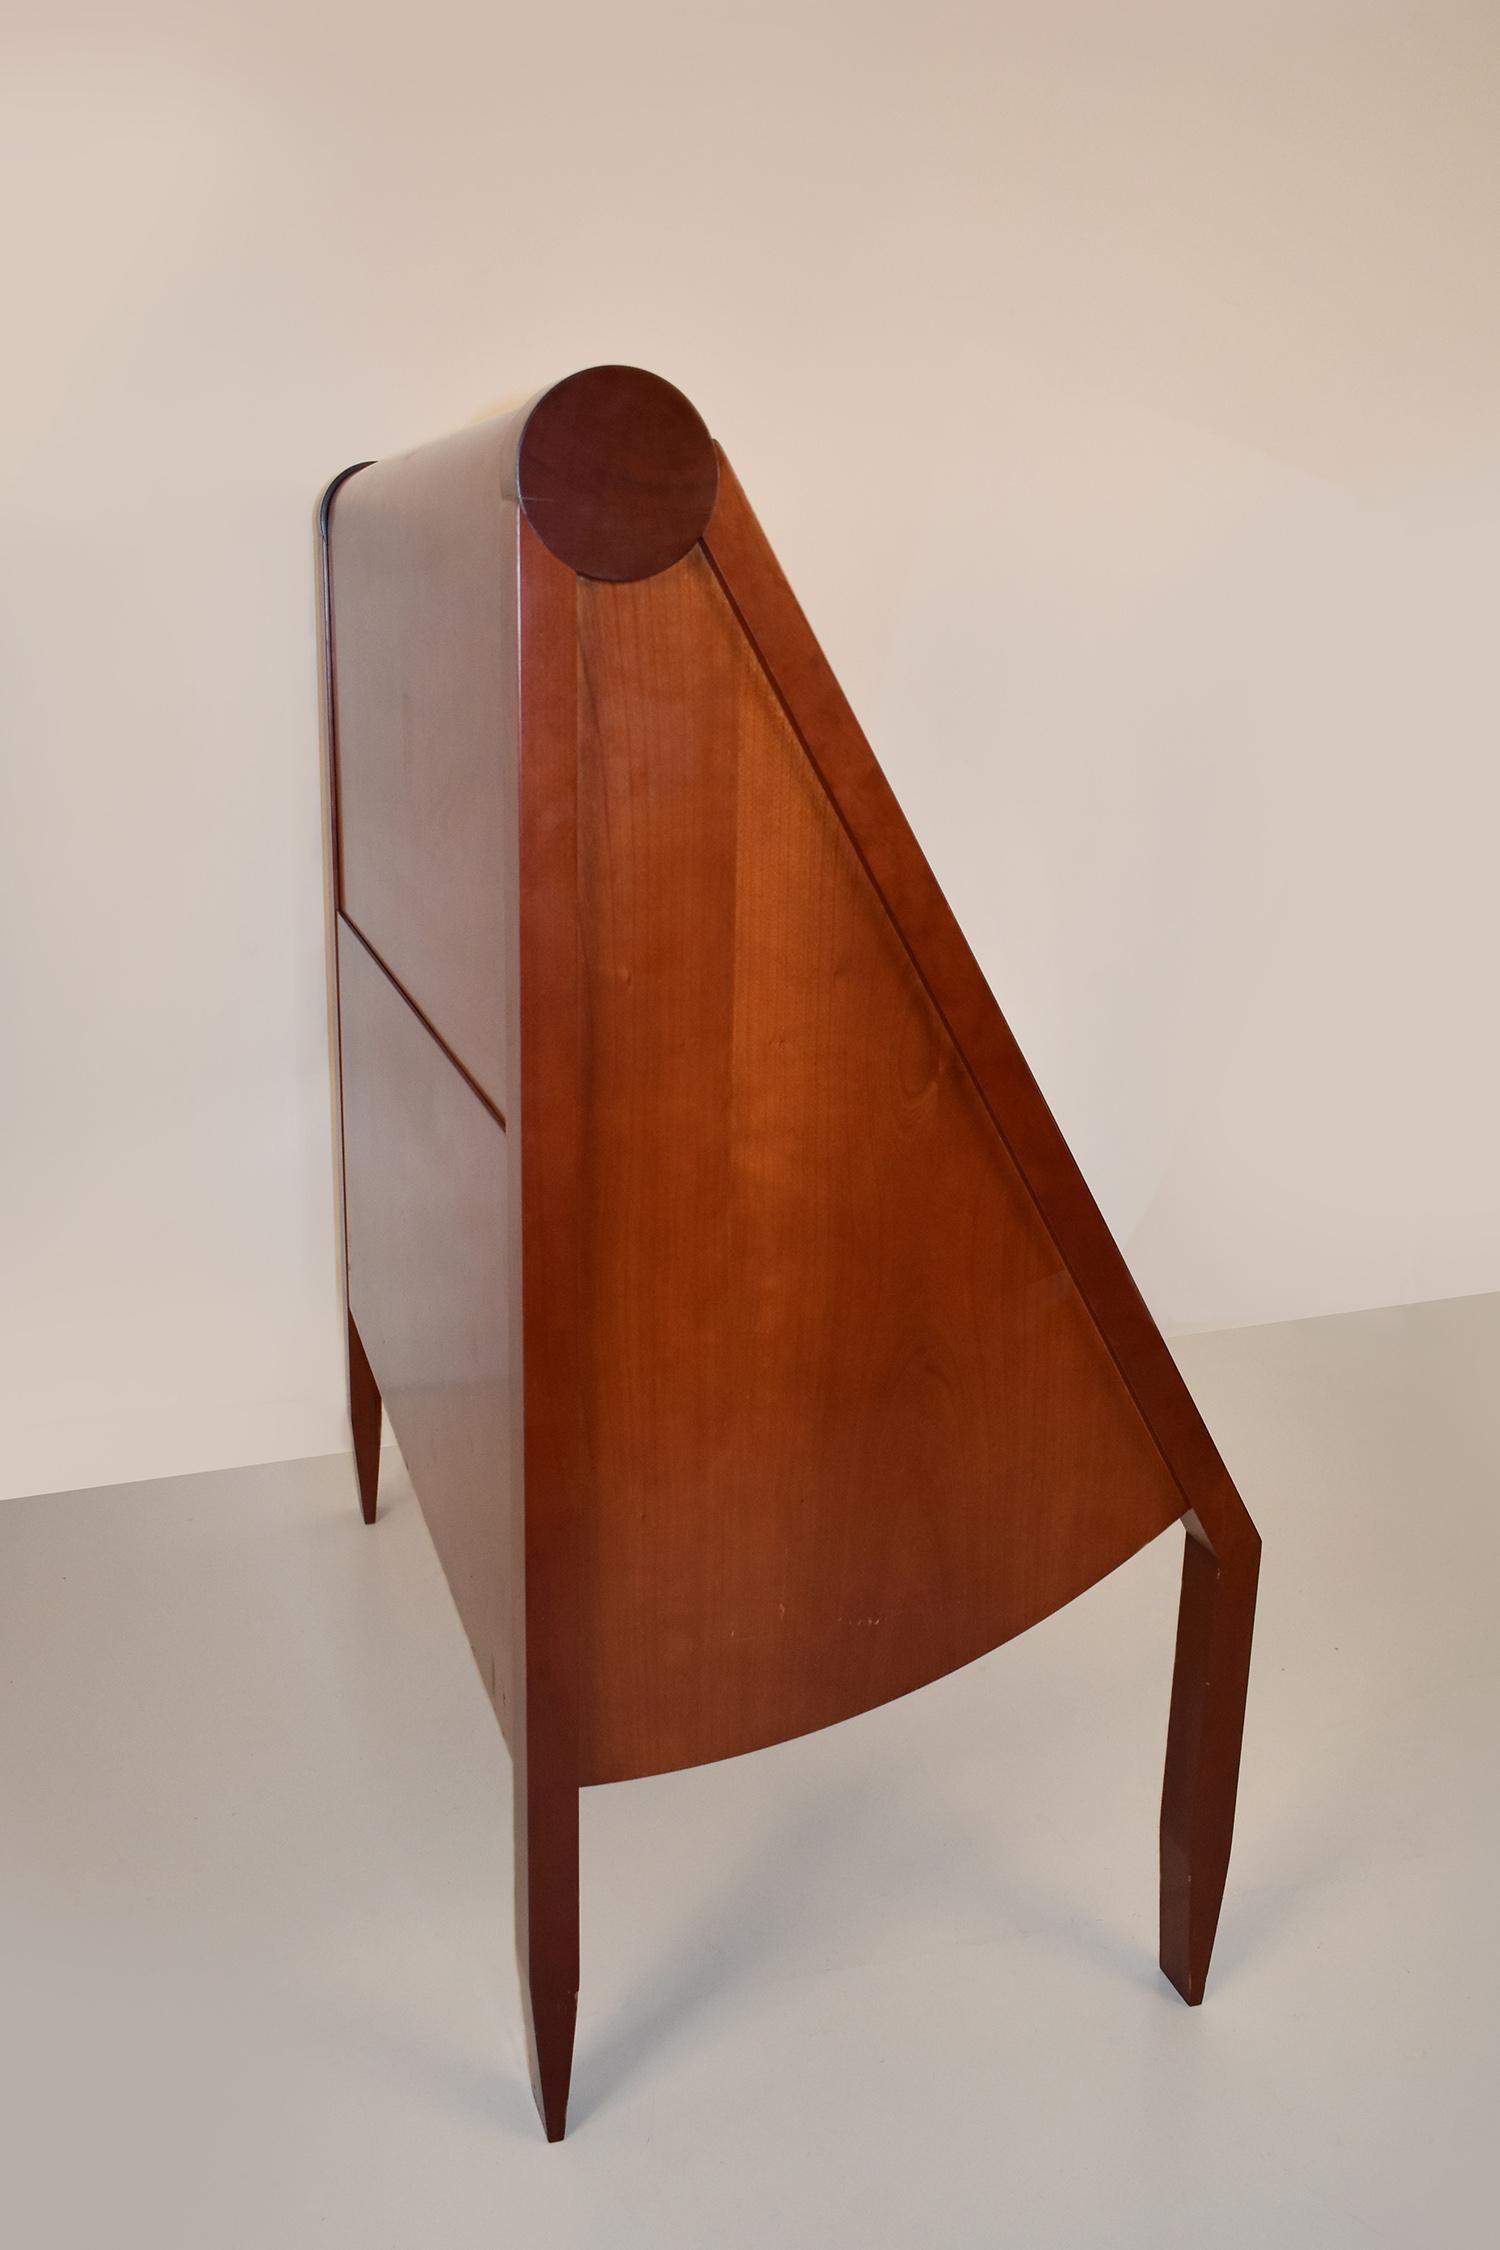 Cherry Compass Writing Desk Bureau by Pedro Miralles Claver for Punt Mobles, circa 1990